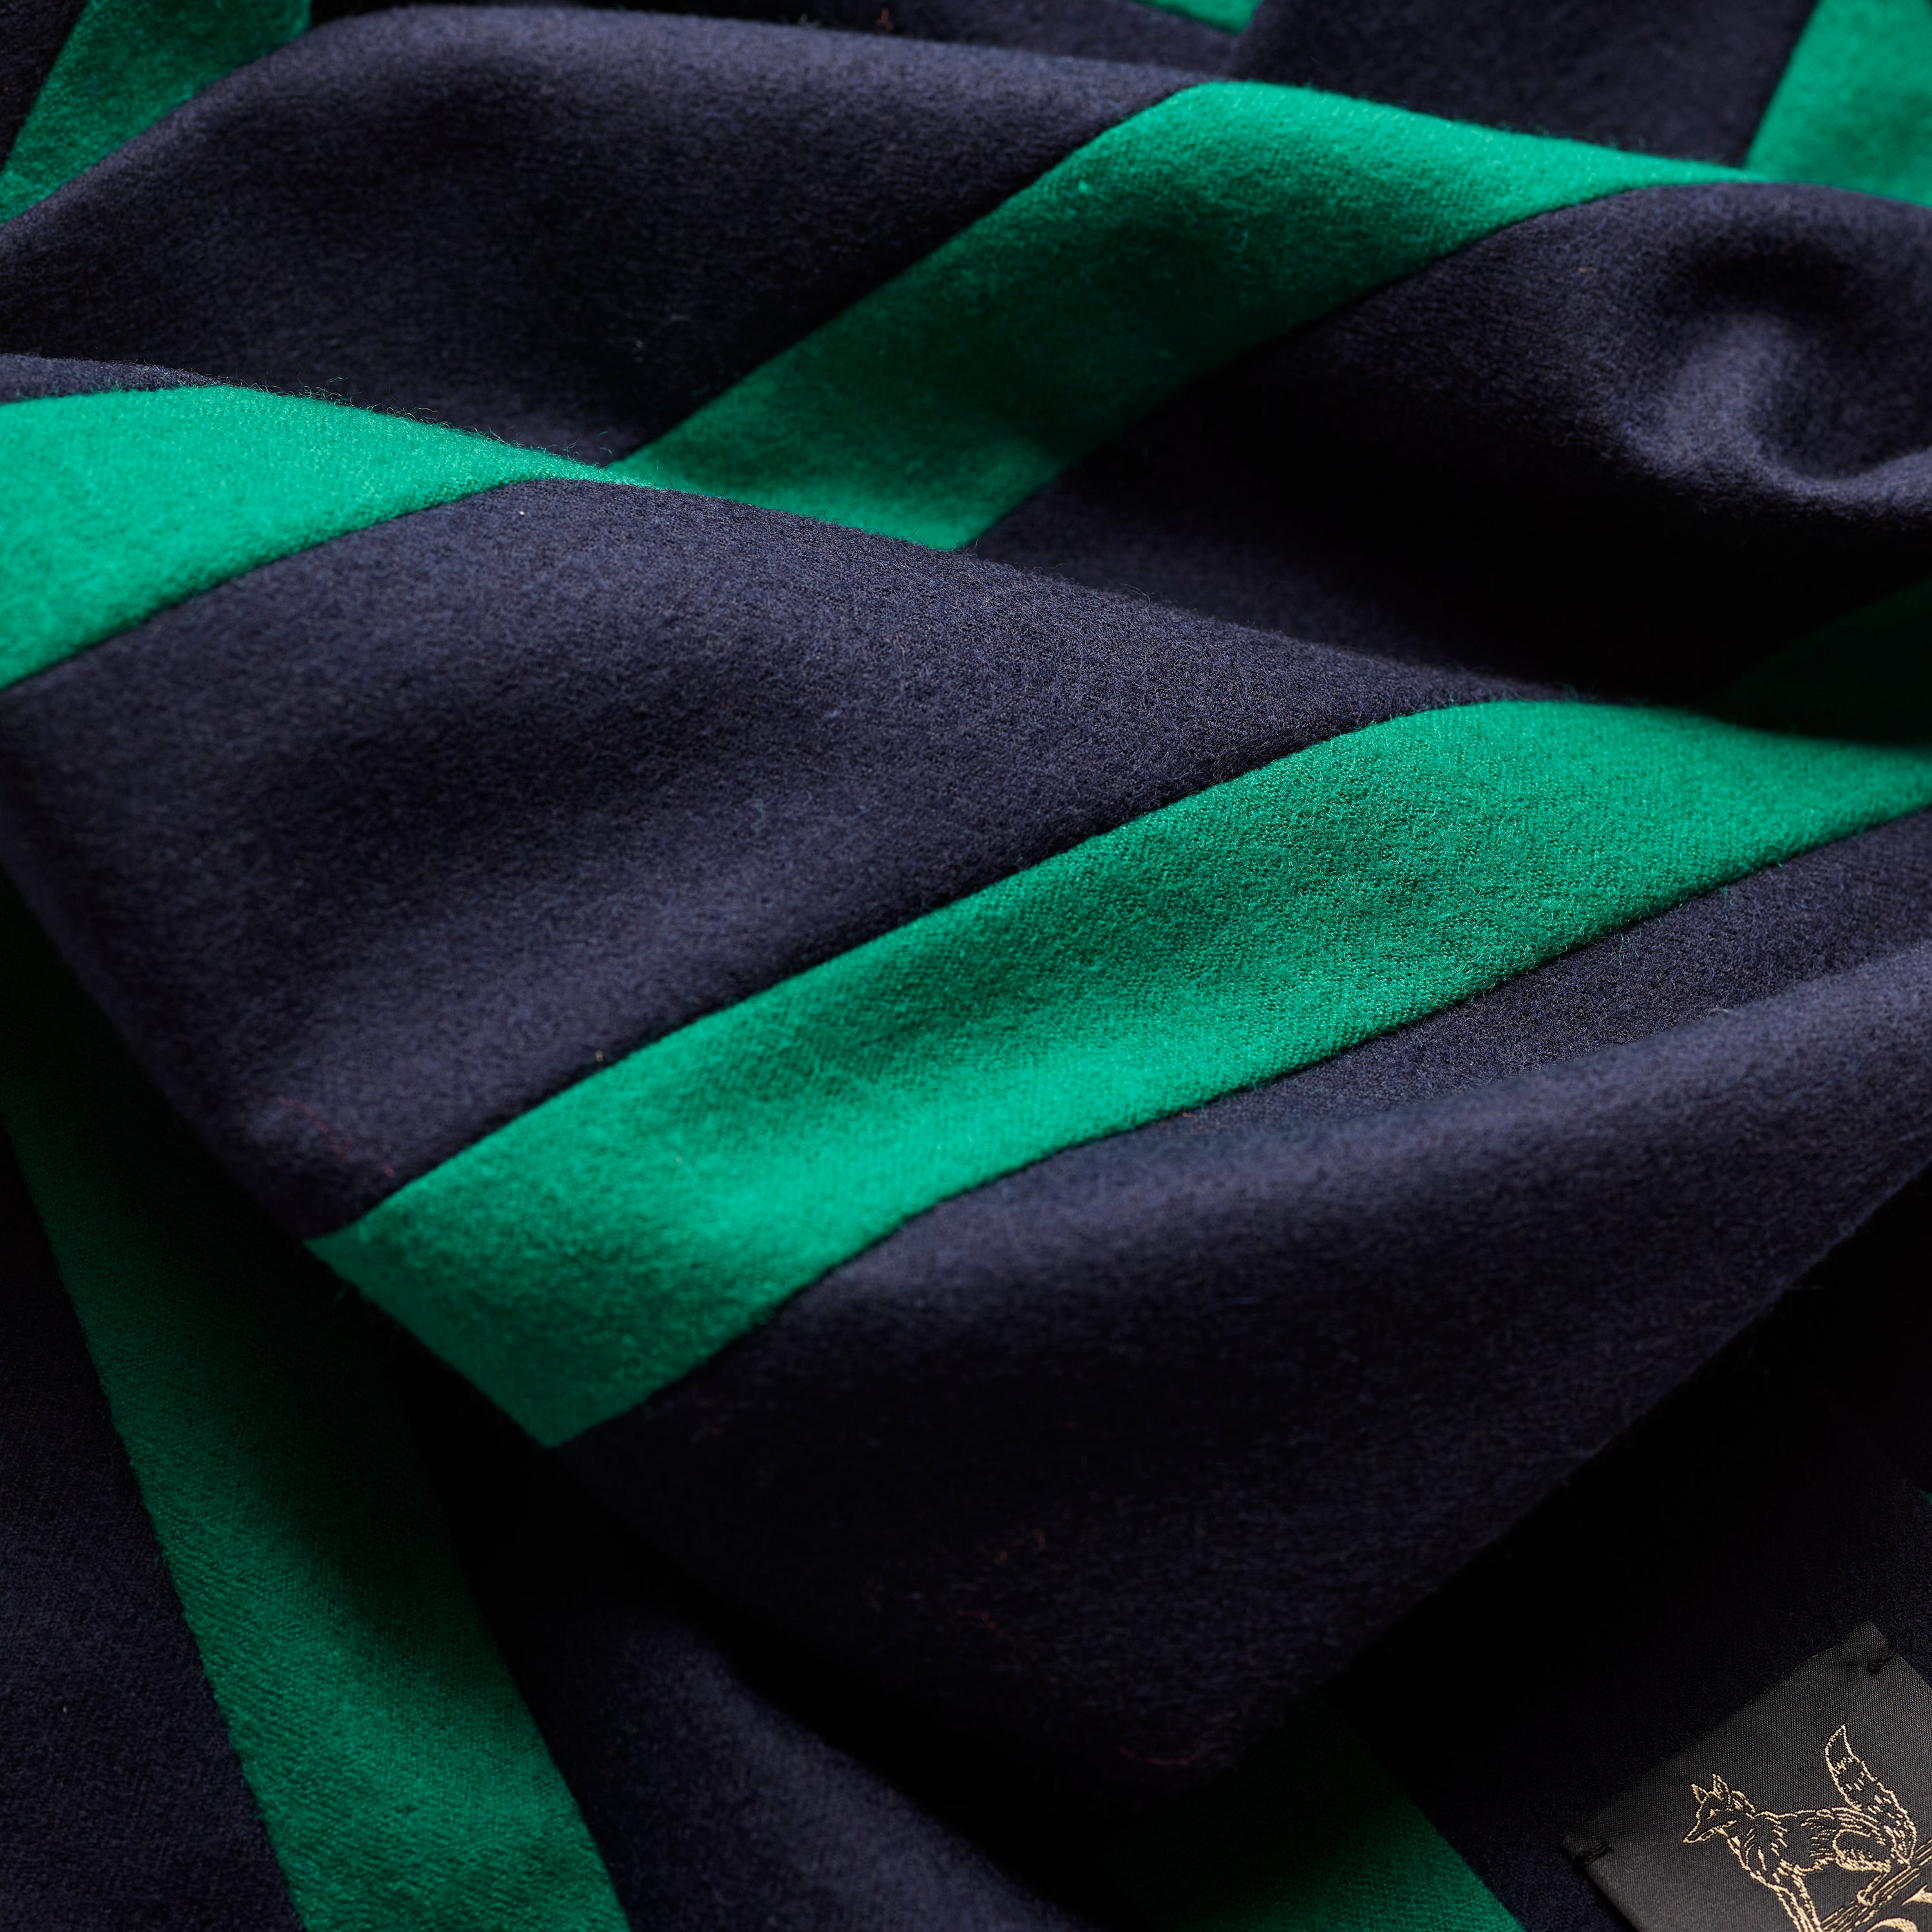 Fox Brothers Navy and Bright Green College Scarf